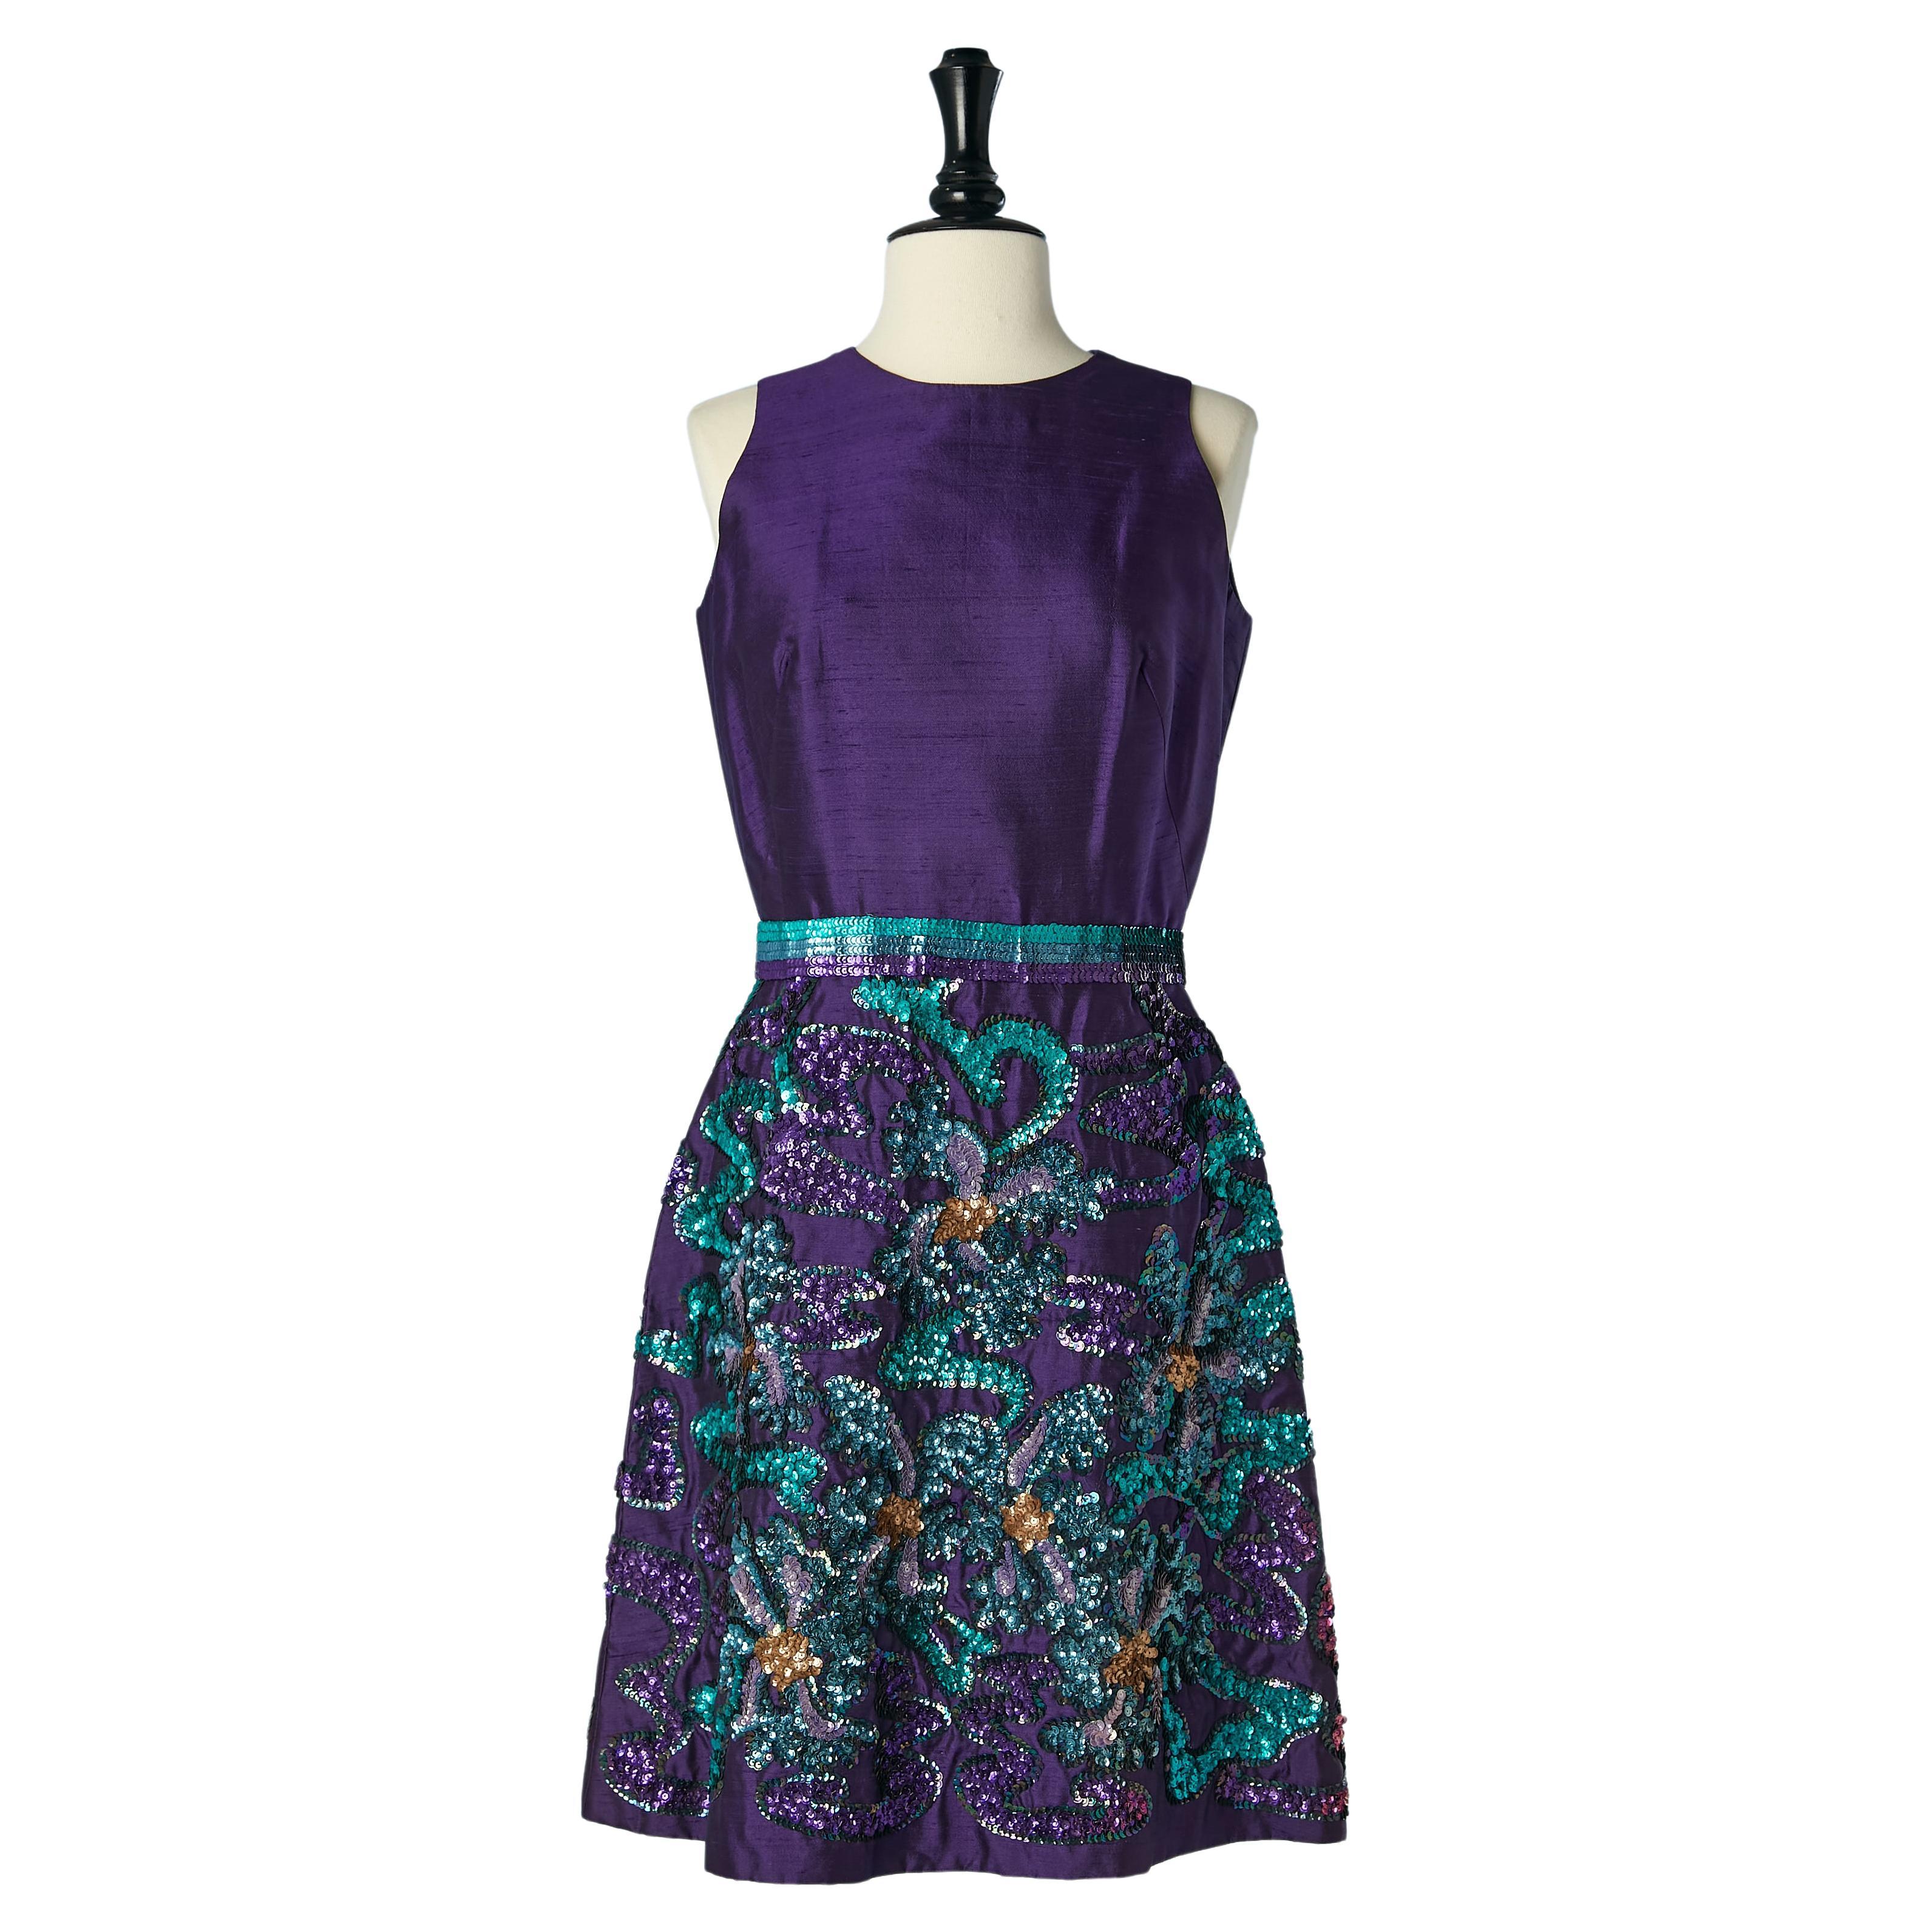 Purple shantung cocktail dress with sequins embroideries on the skirt Circa 1960 For Sale